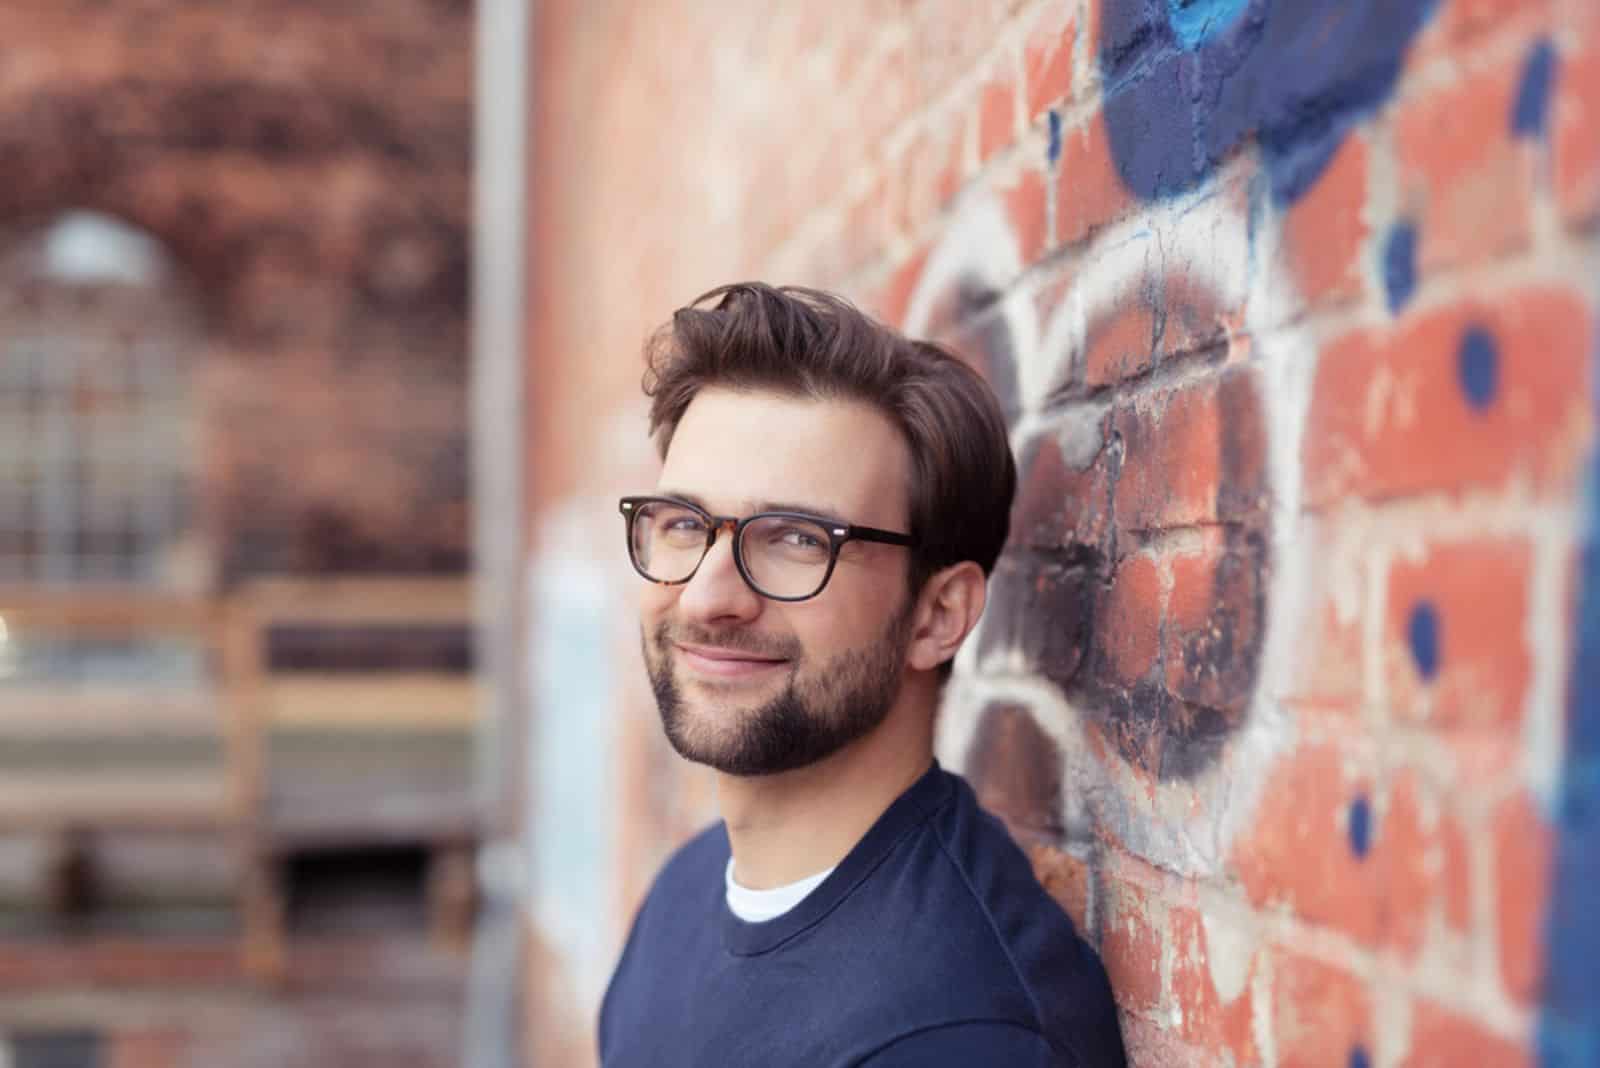 smiling man with glasses